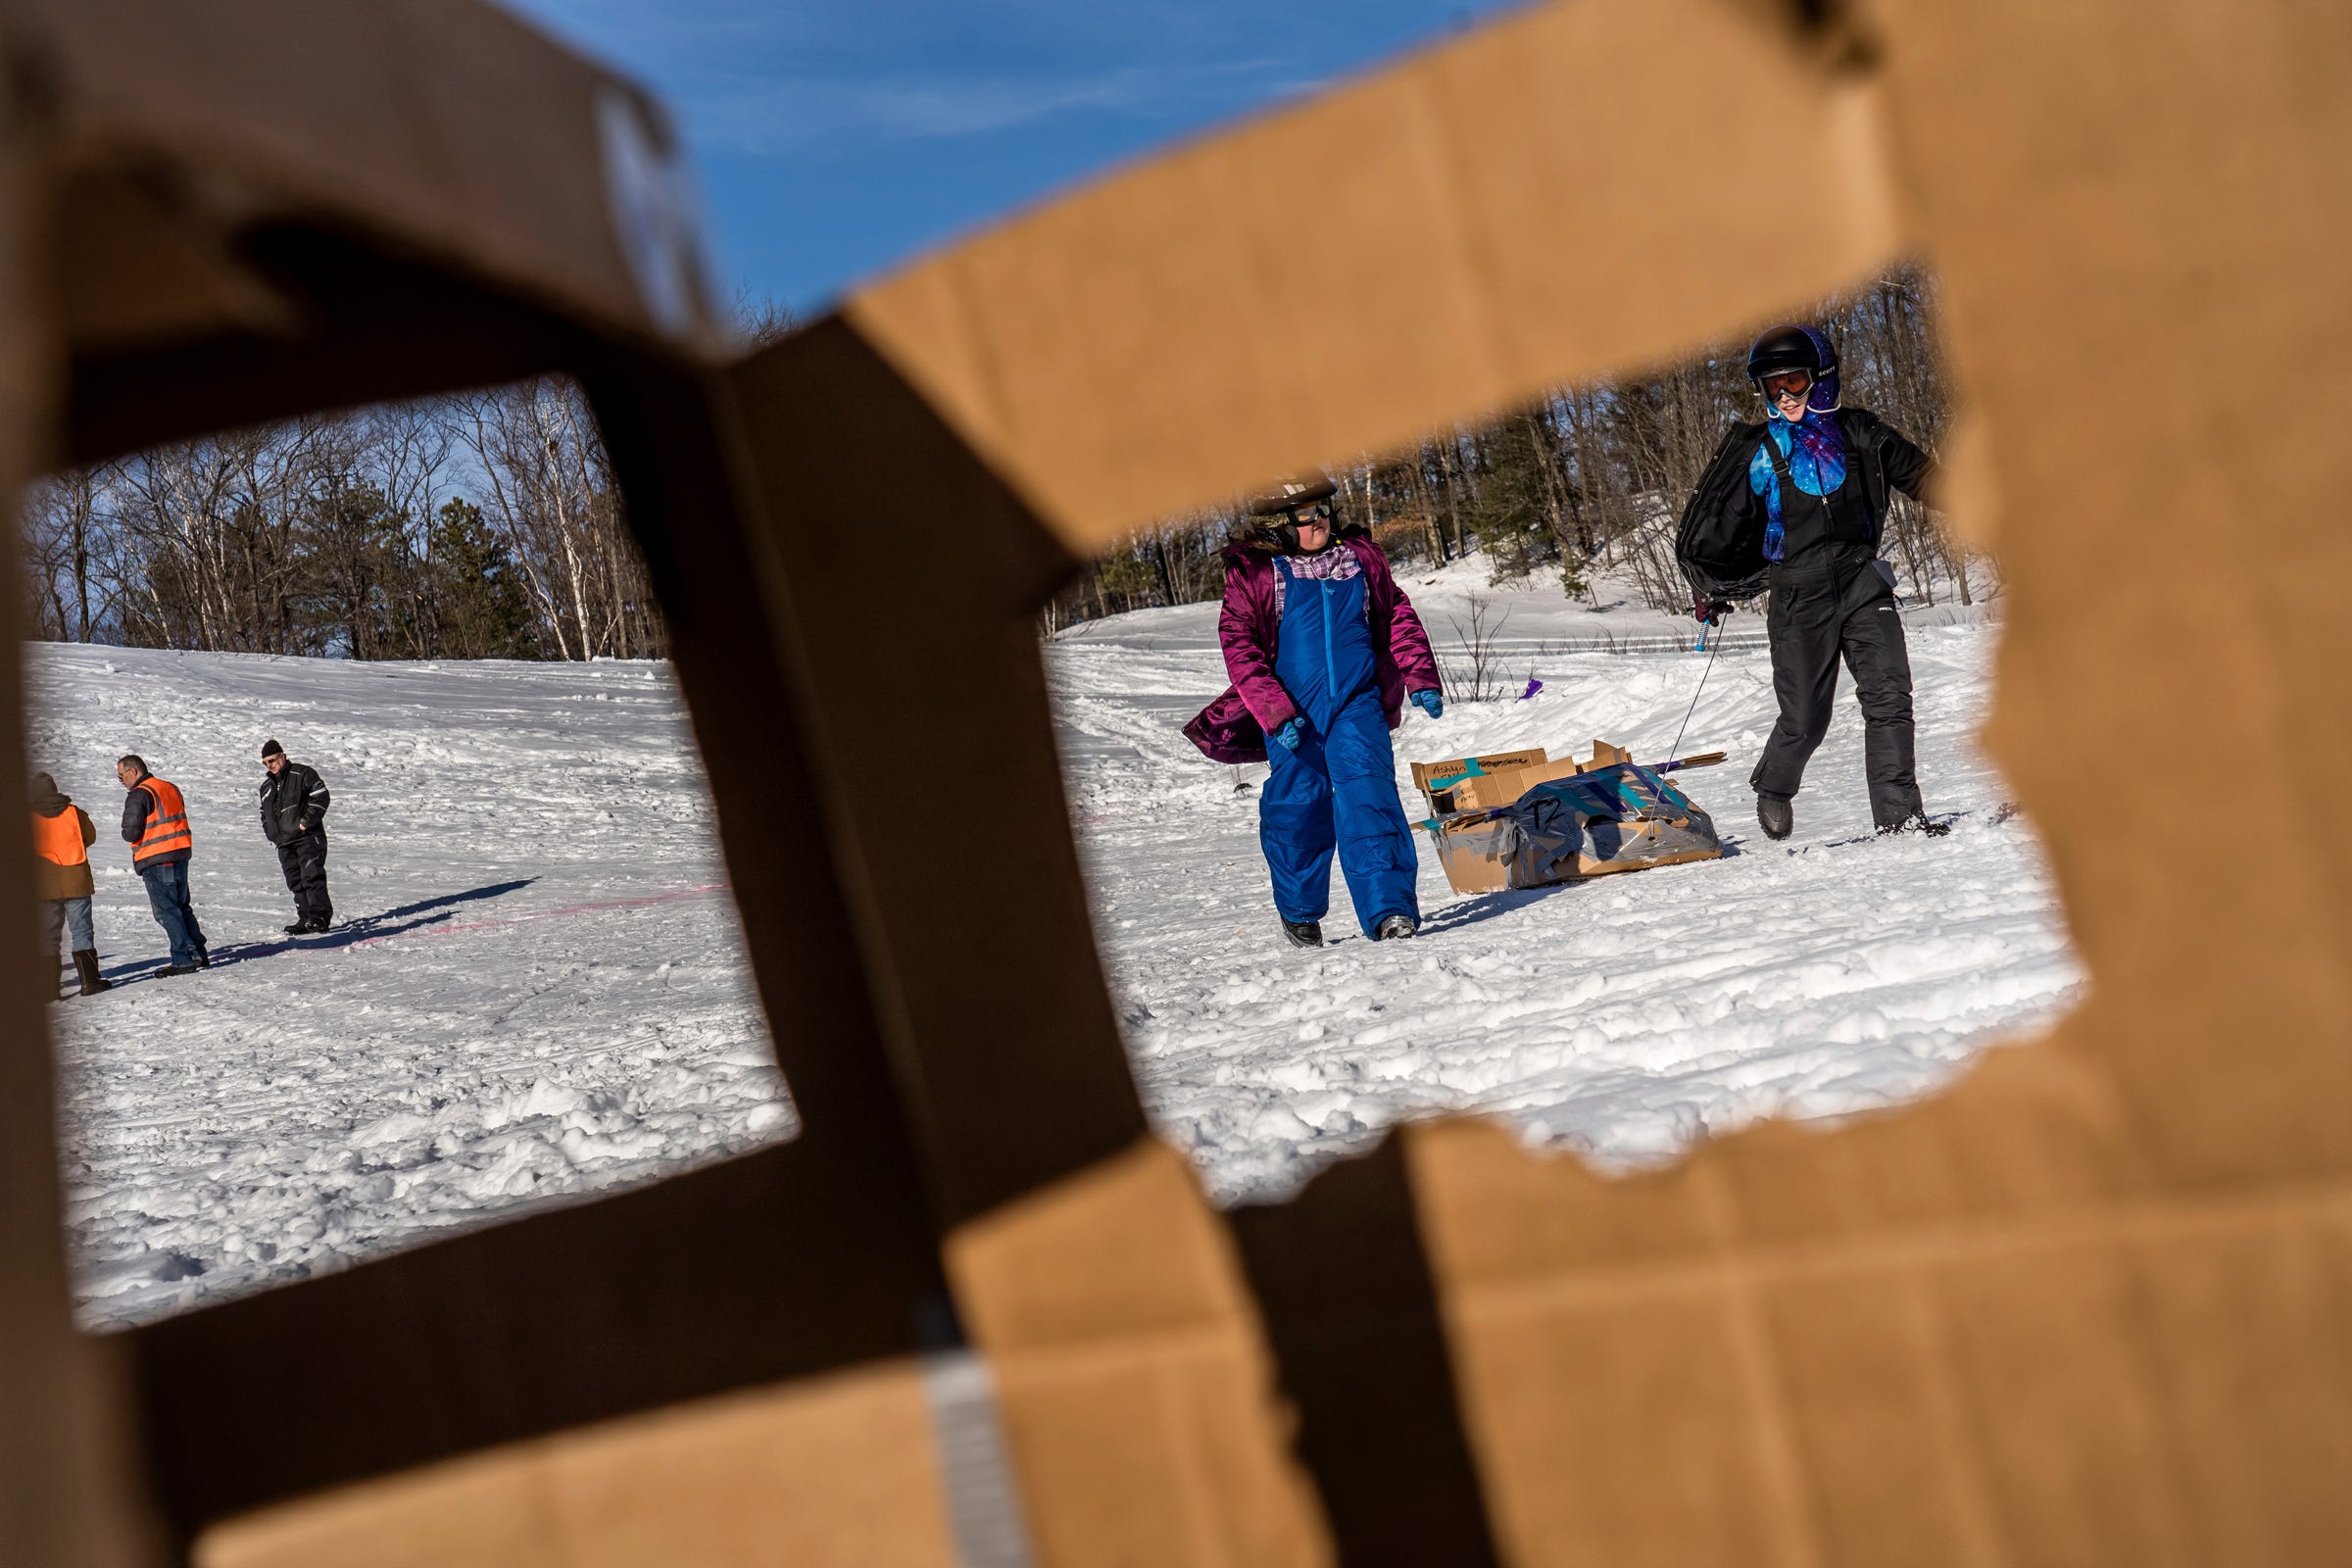 Bella Taylor, center, and her teammate Ashlyn Olvera, right, both of Gwinn, haul their cardboard sled away after competing in the K.I. Sawyer Community Cardboard Sled Races on Feb. 11, 2023.